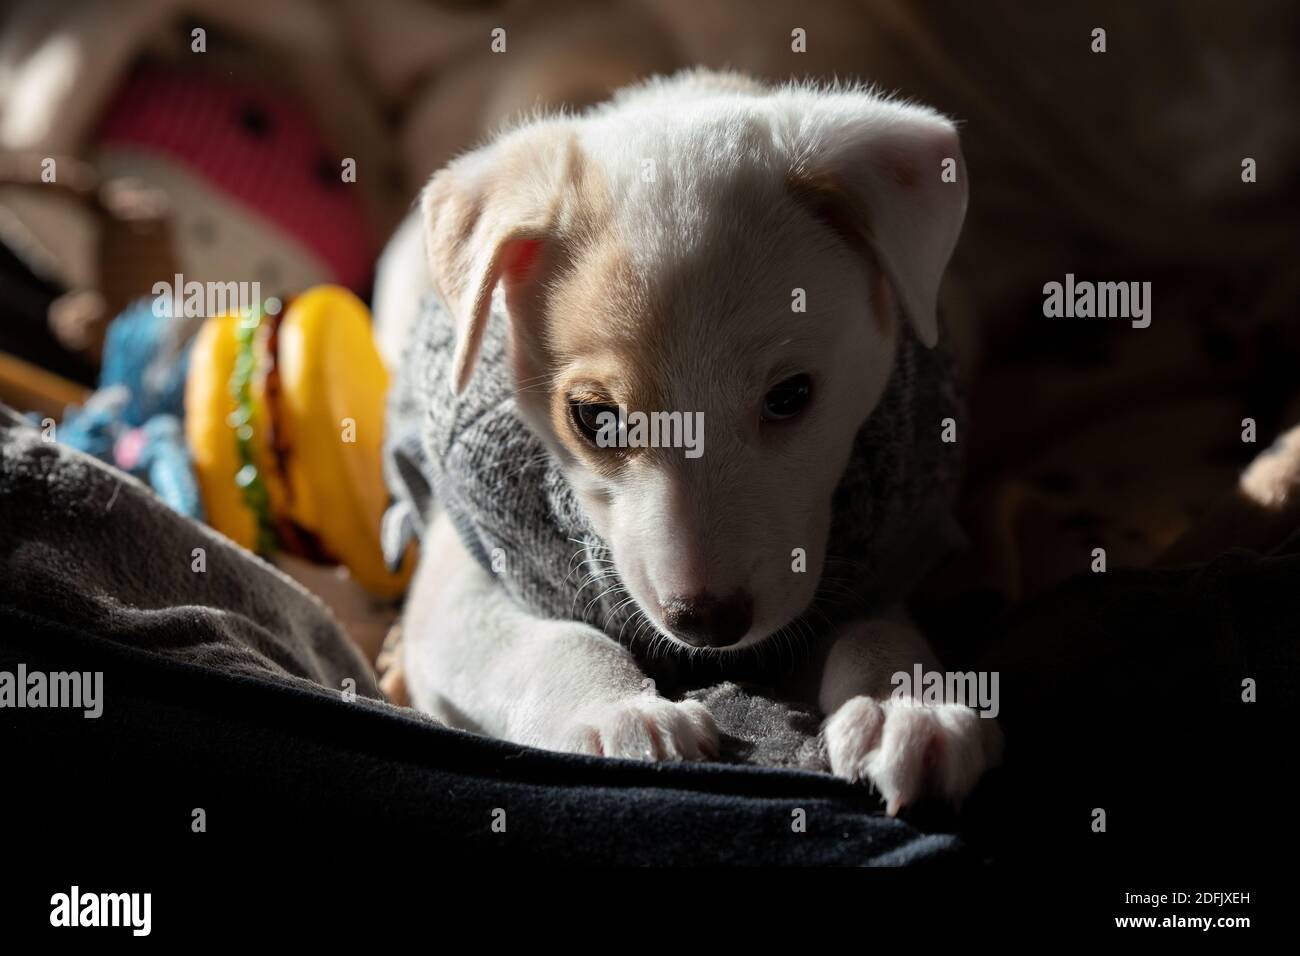 Dark face portrait of a young female puppy wearing a sweater at home Stock Photo